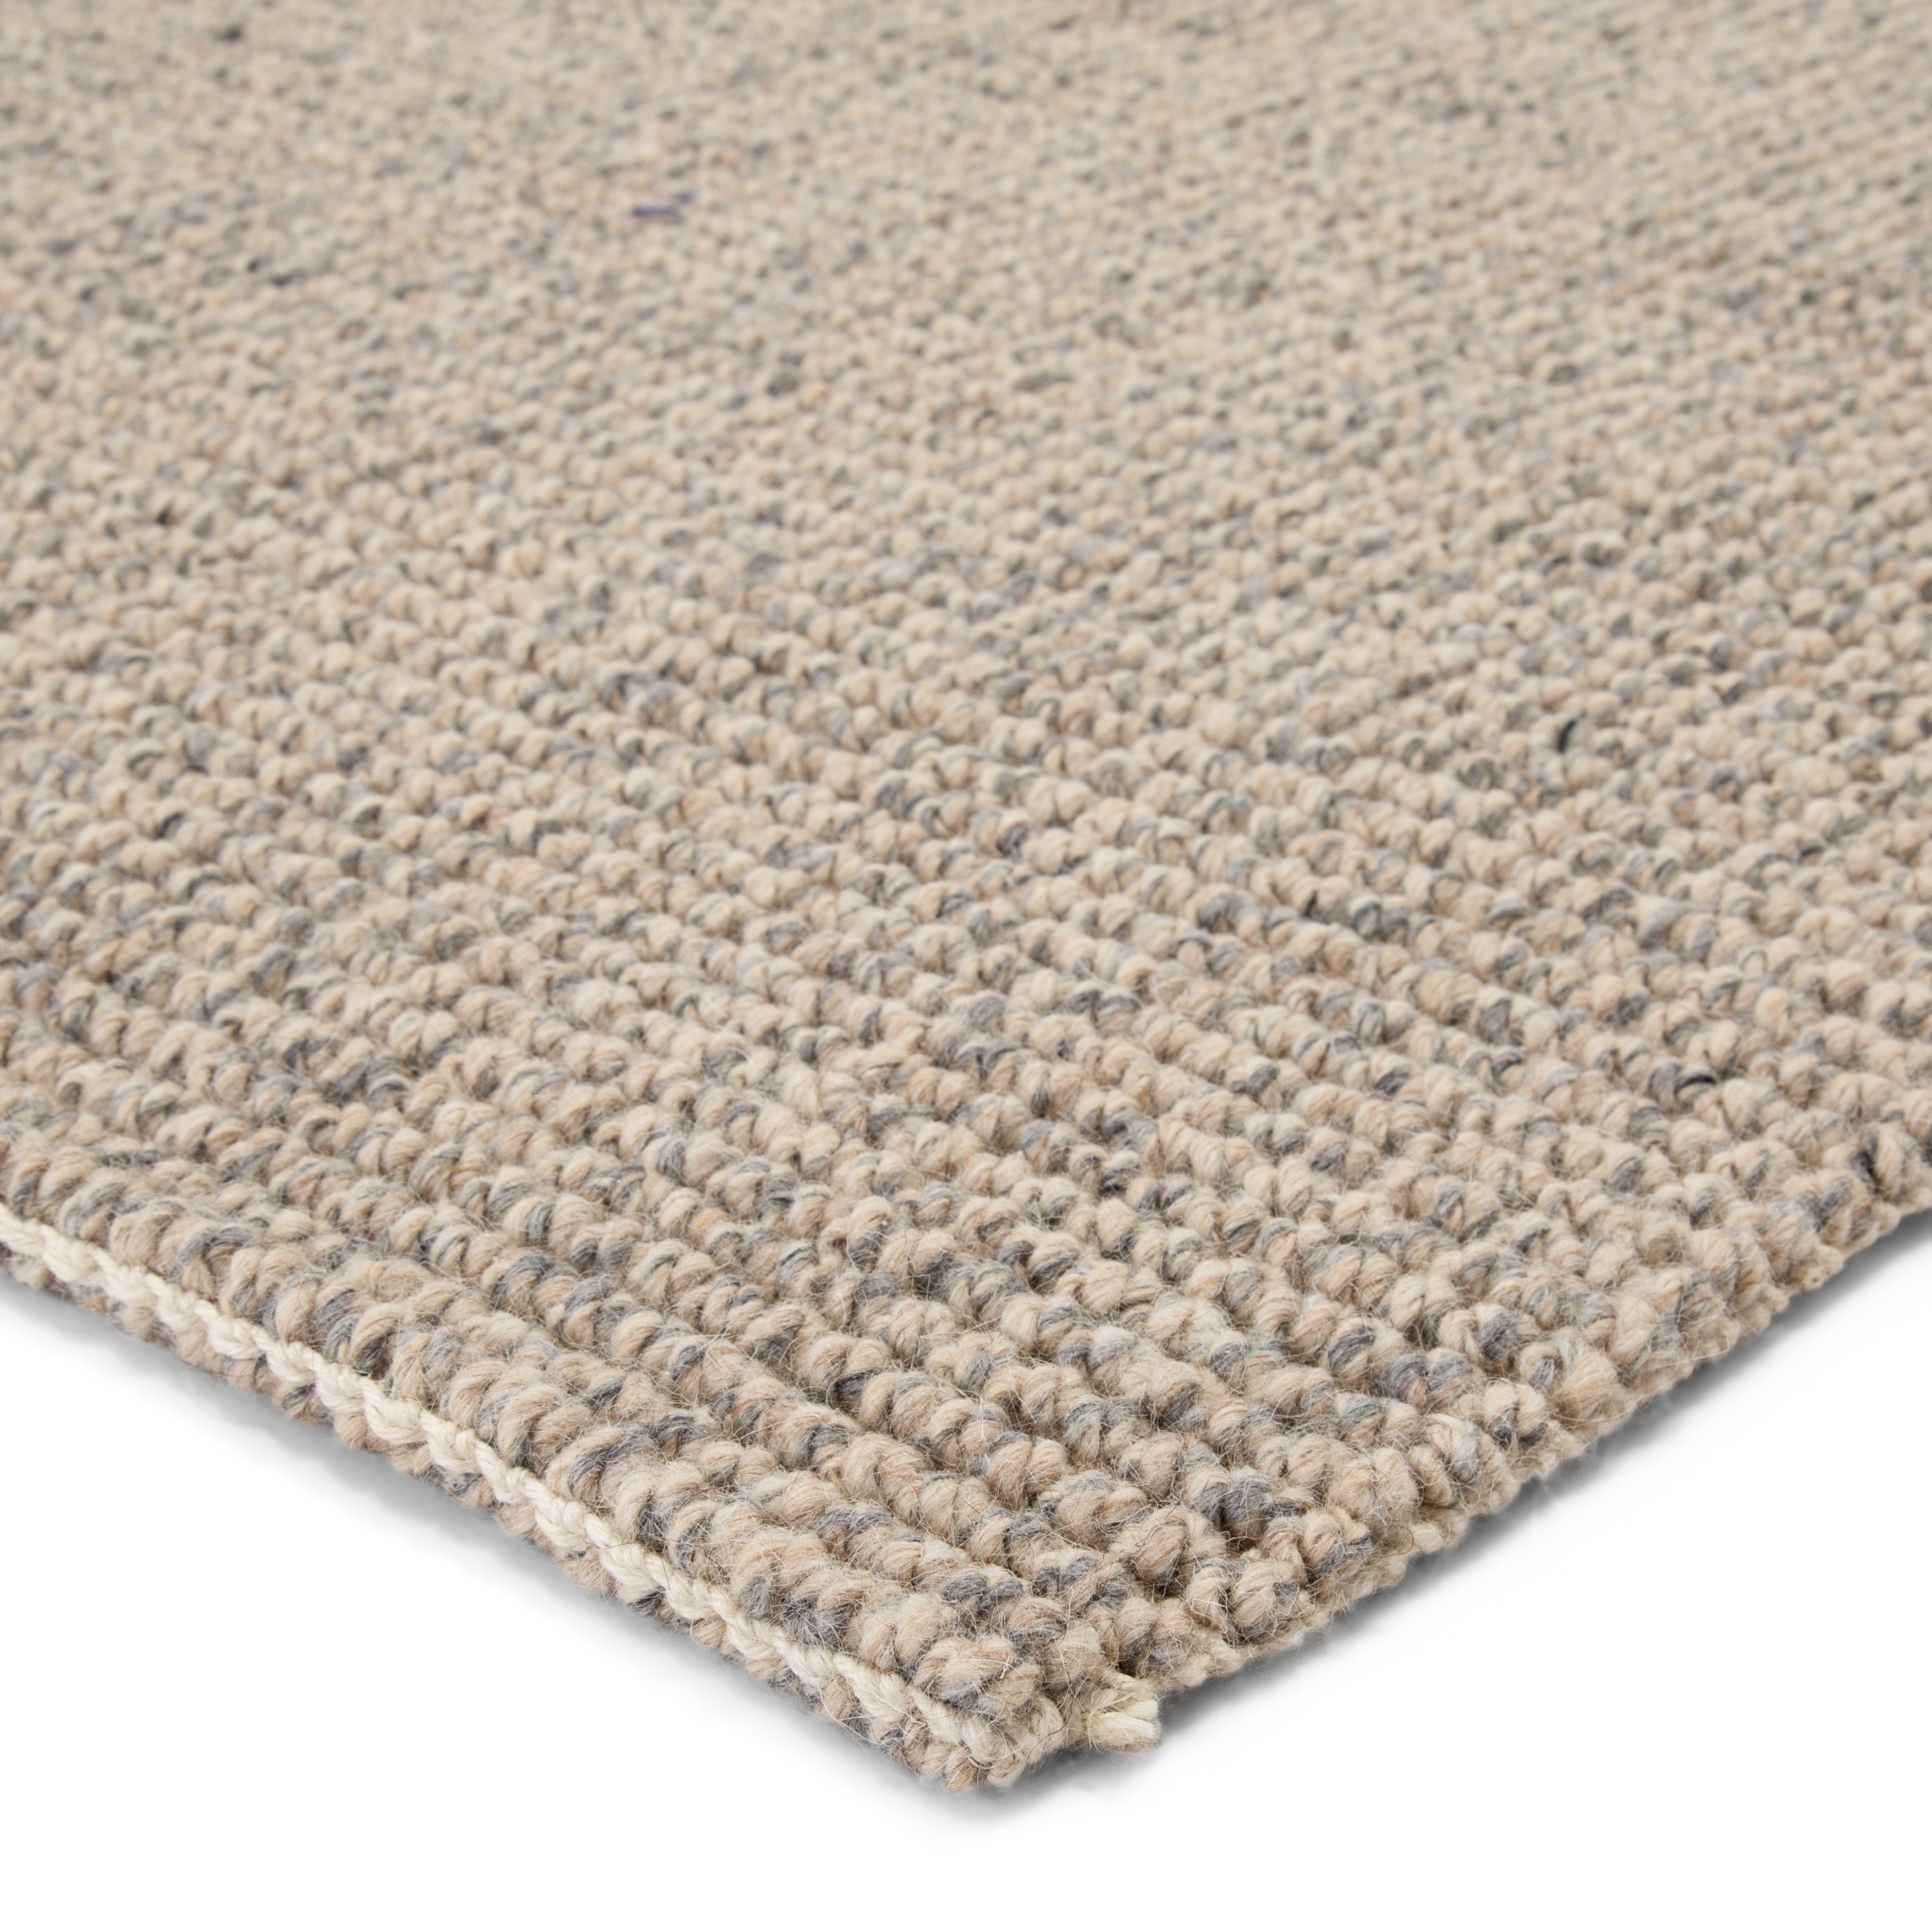 Chael Natural Solid Gray/ Beige Area Rug (10'X14') - Image 1